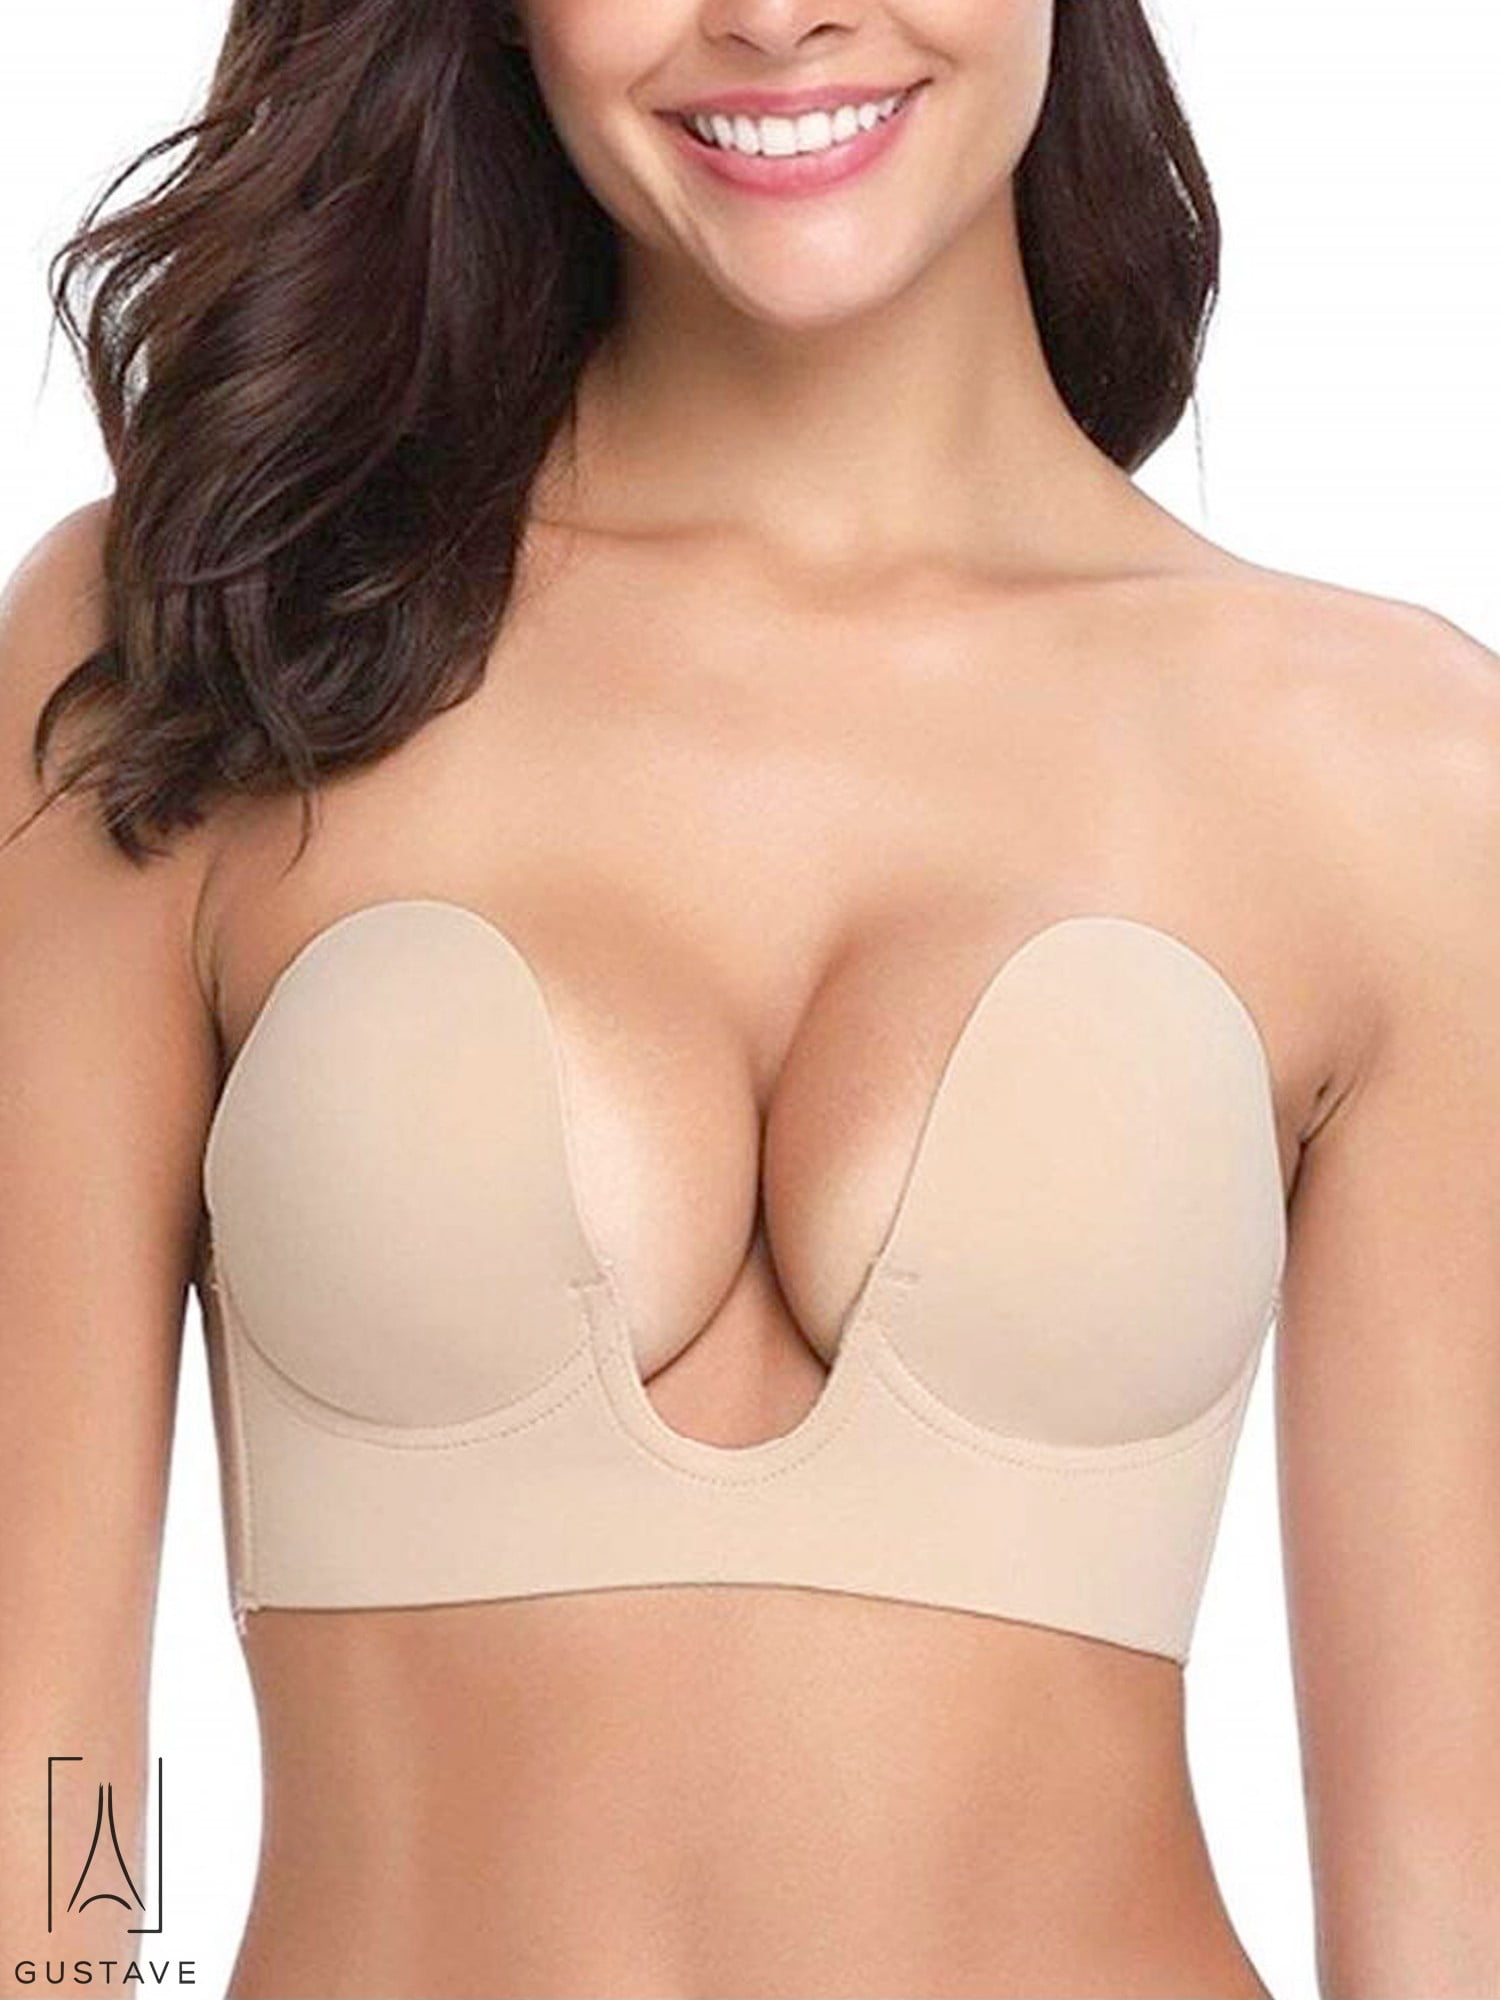 Gustave Invisible Bras for Women Push Up Strapless Self Adhesive Deep U  Plunge Bra Silicone Backless underwear Beige, Cup C 